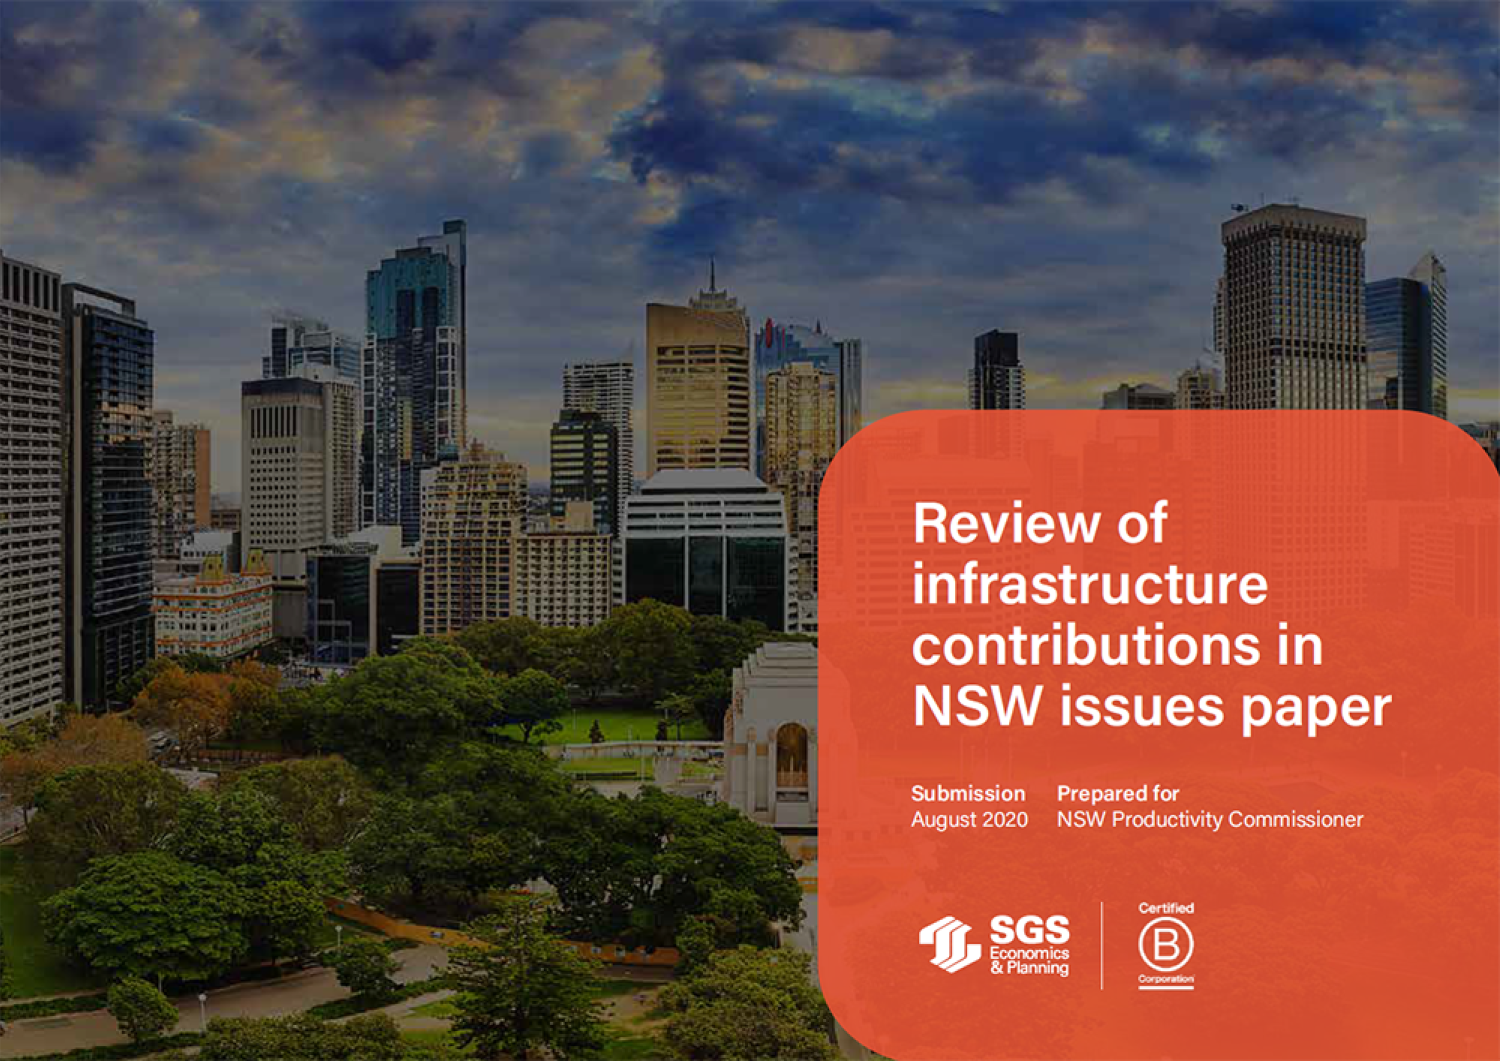 SGS NSW Infrastructure Contributions Review Paper cover